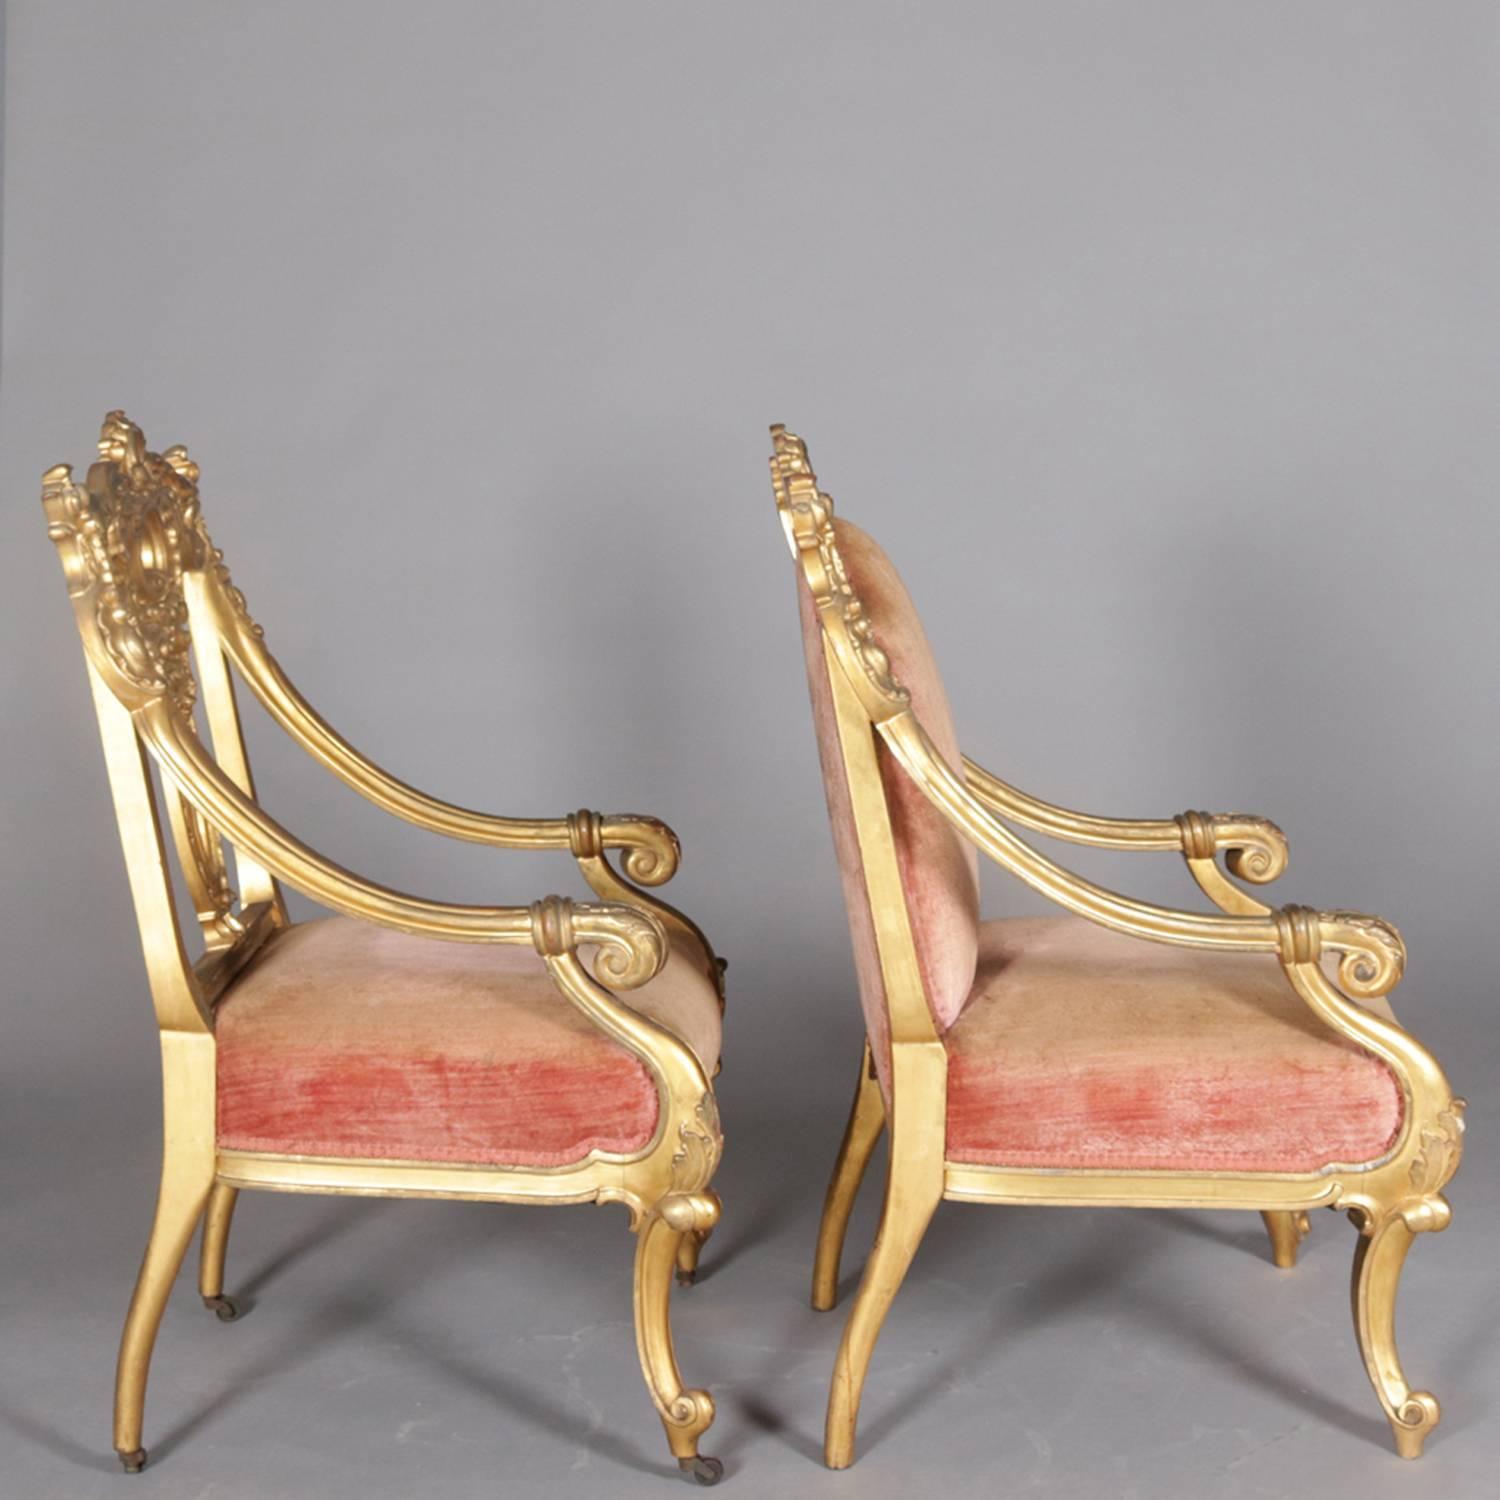 Pair of French Rococo style giltwood armchairs feature pierced foliate and scroll carved crests, scroll form arms and legs, velvet upholstered seats, and one with open ribbon back and the other with upholstered back, circa 1880

Measures: hollow